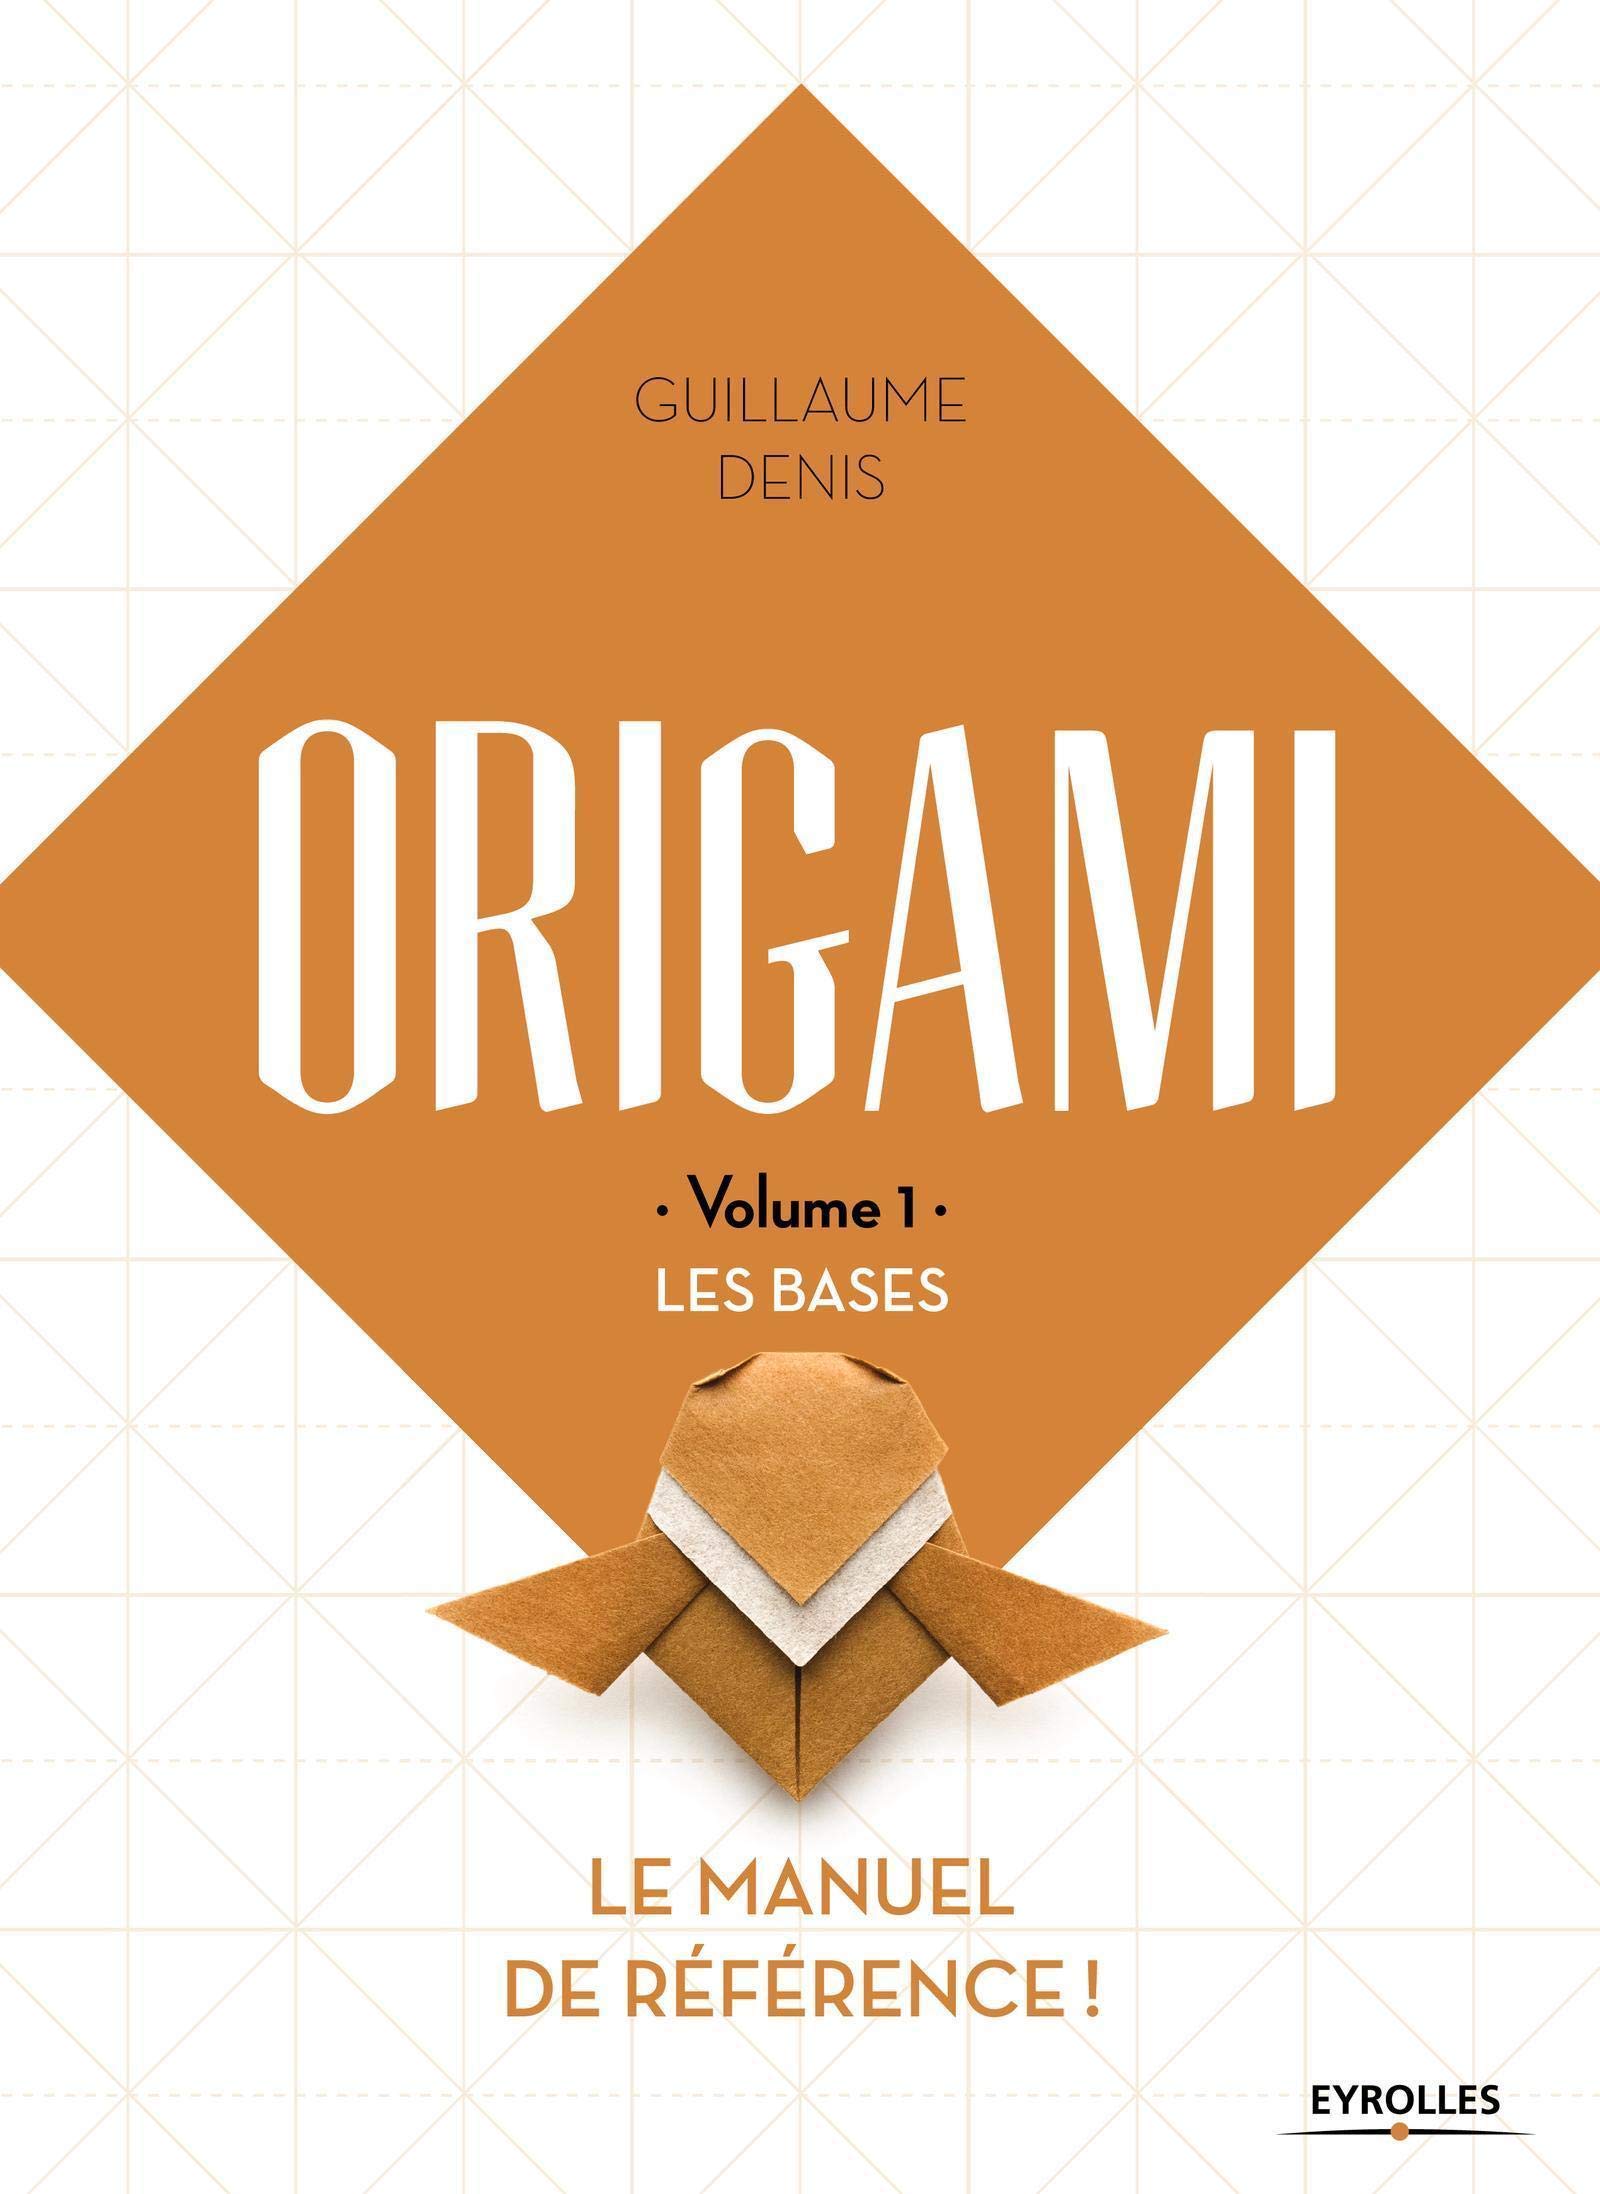 ORIGAMI - Volume 1 - LES BASES : page 64.